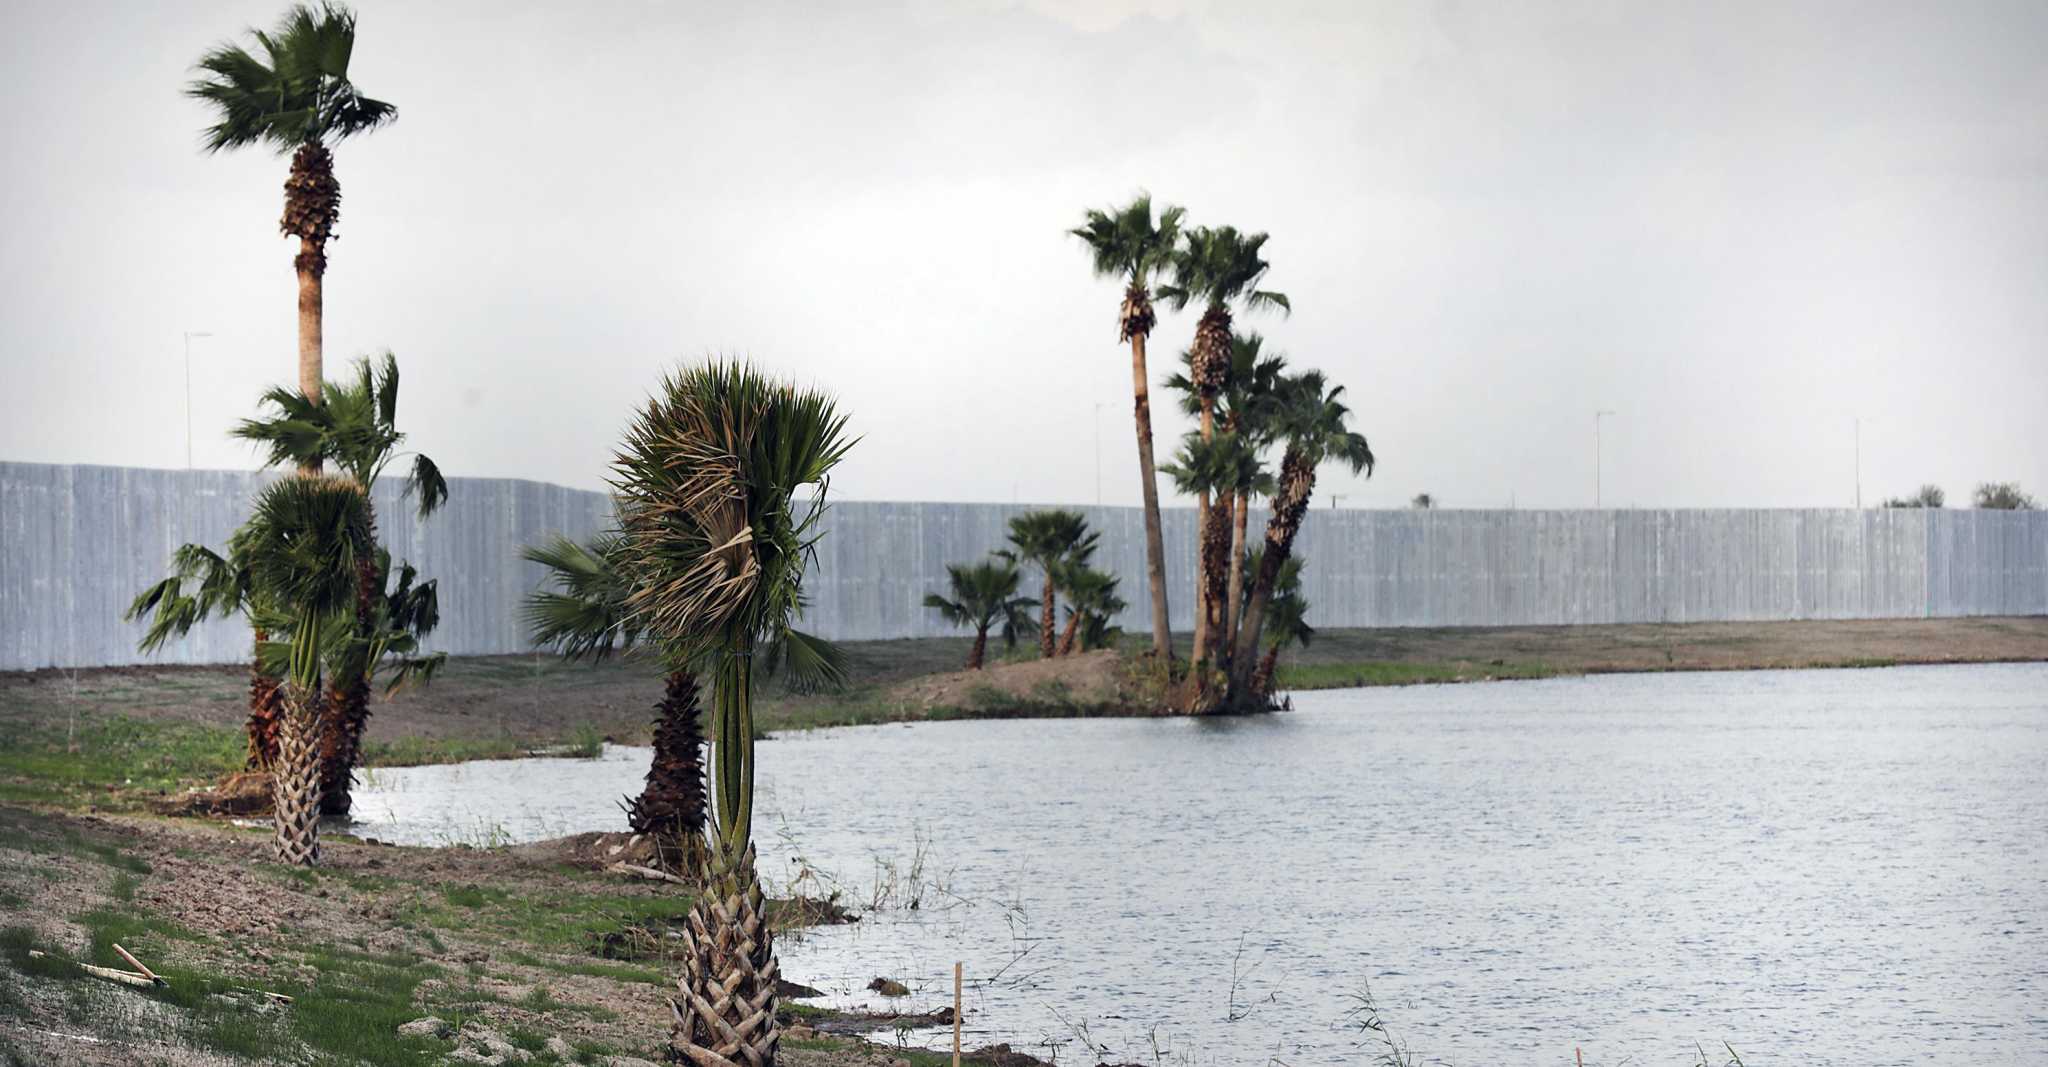 Private Border Wall In The Rio Grande Valley Meets Wide Opposition